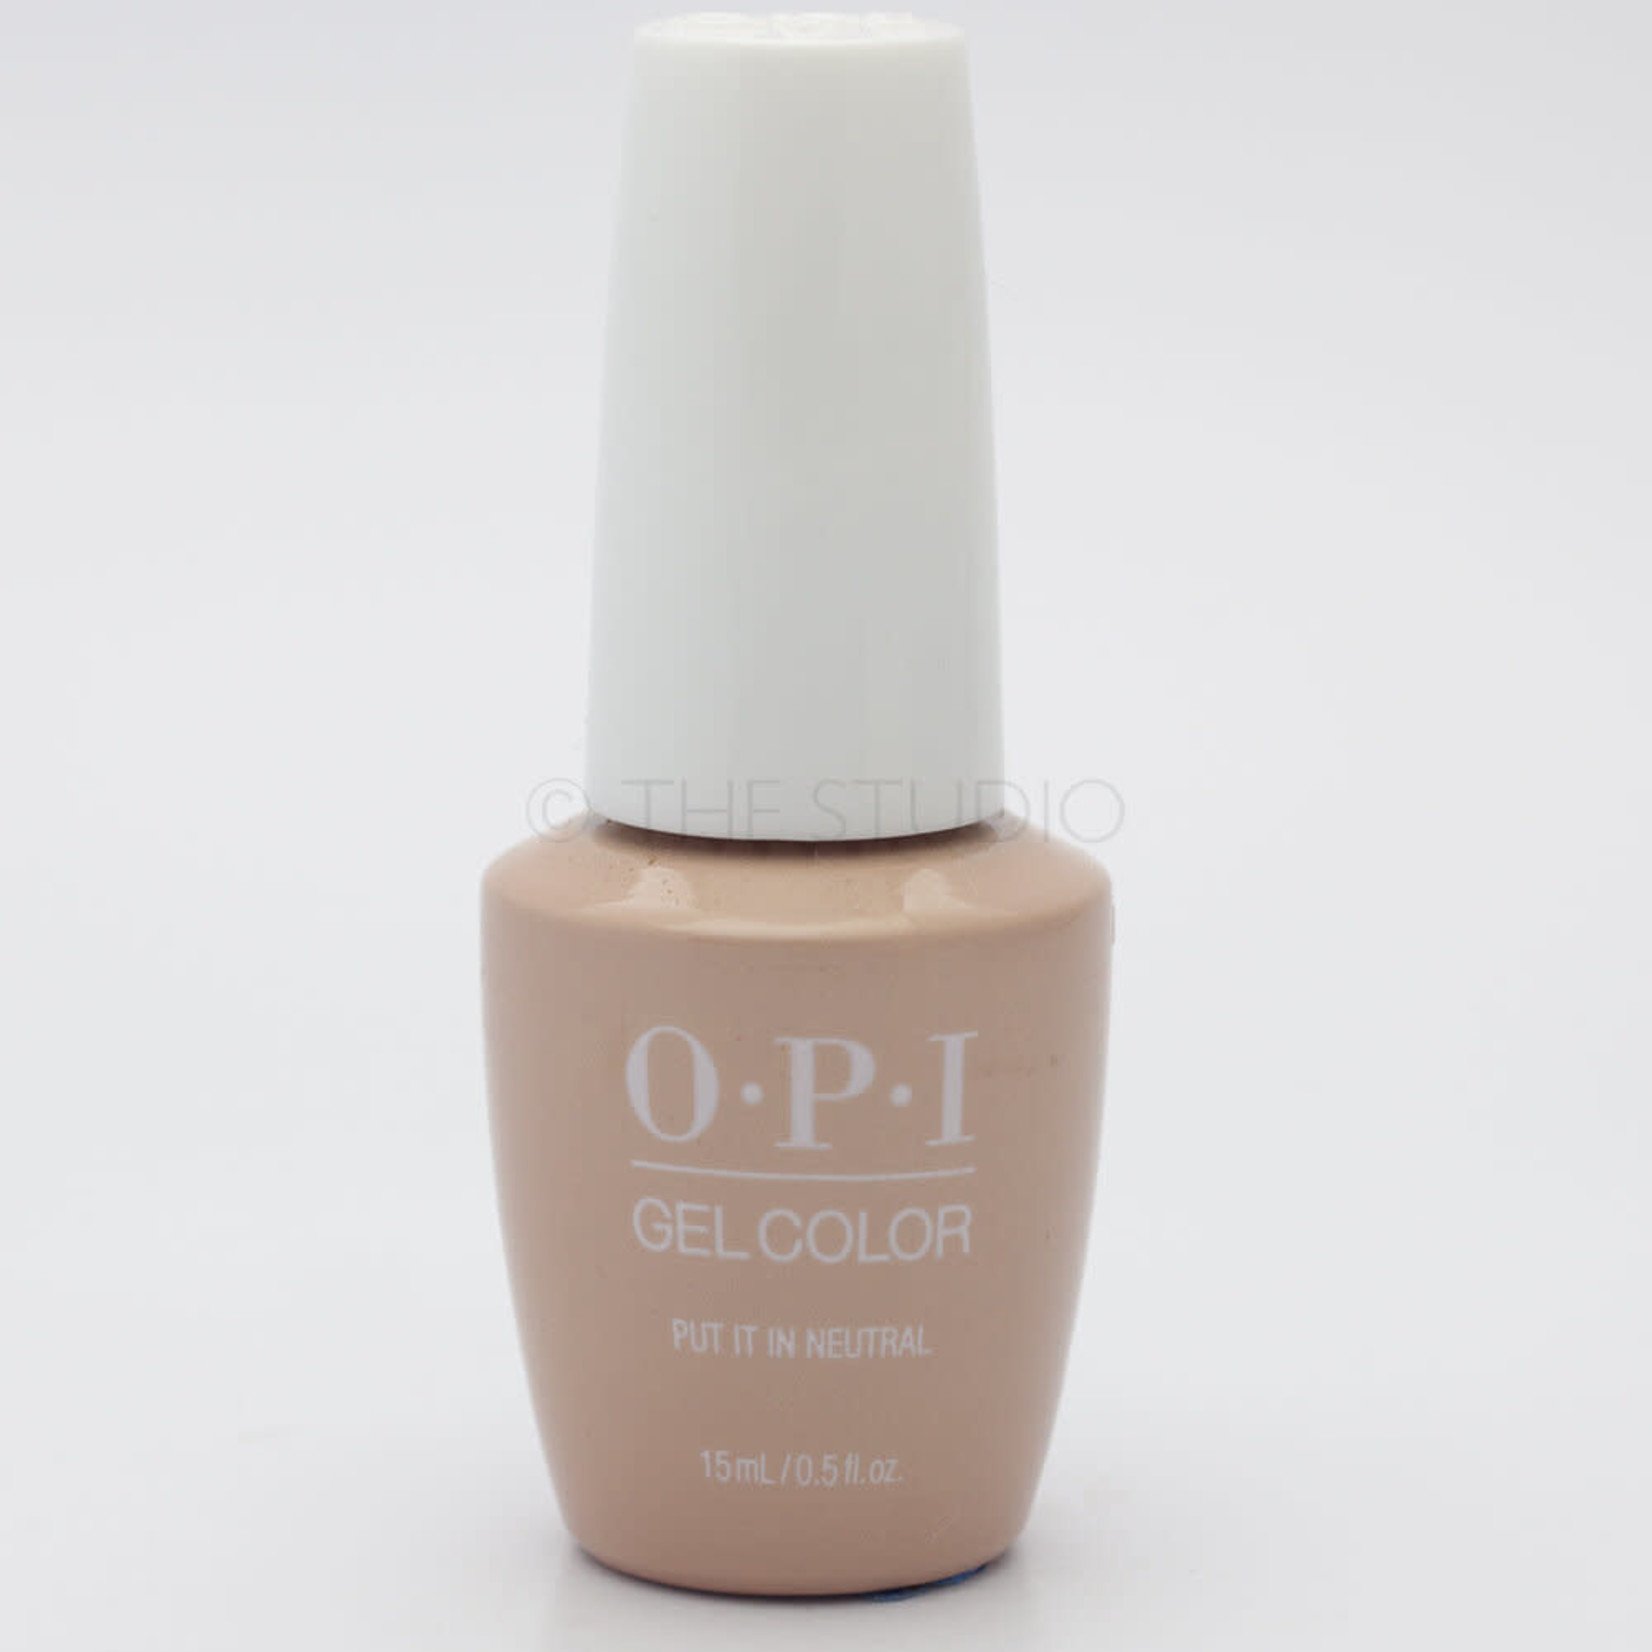 OPI Euro Centrale Spring 2013 Nail Polish Swatches & Review : All Lacquered  Up